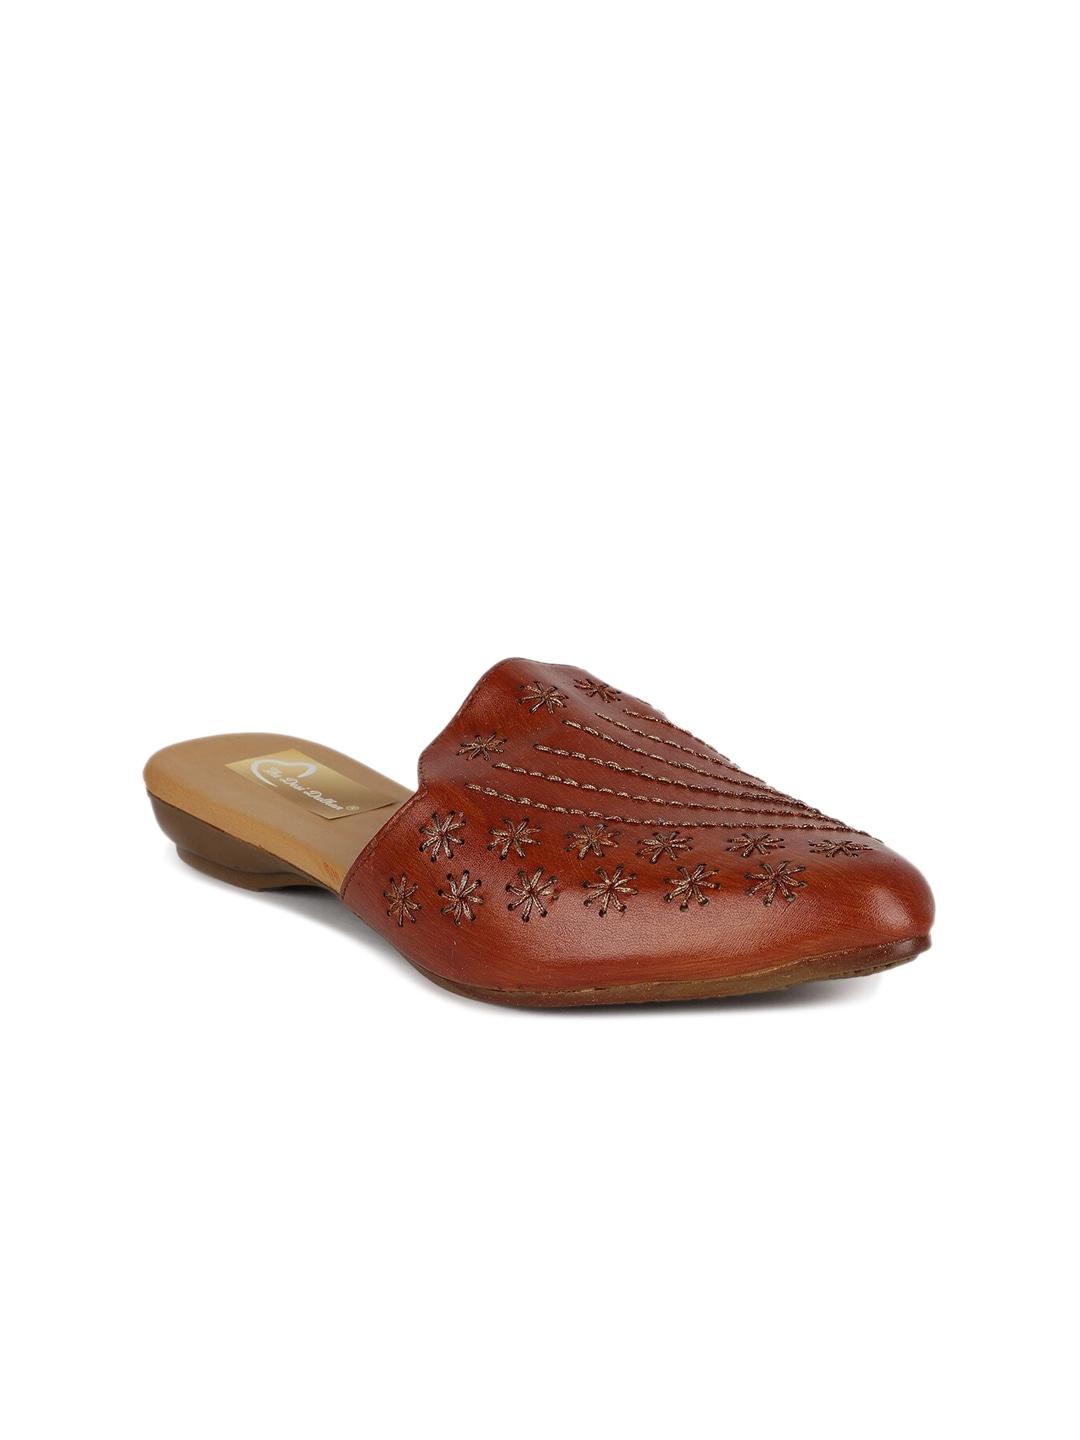 The Desi Dulhan Pointed Toe Embroidered Ethnic Mules